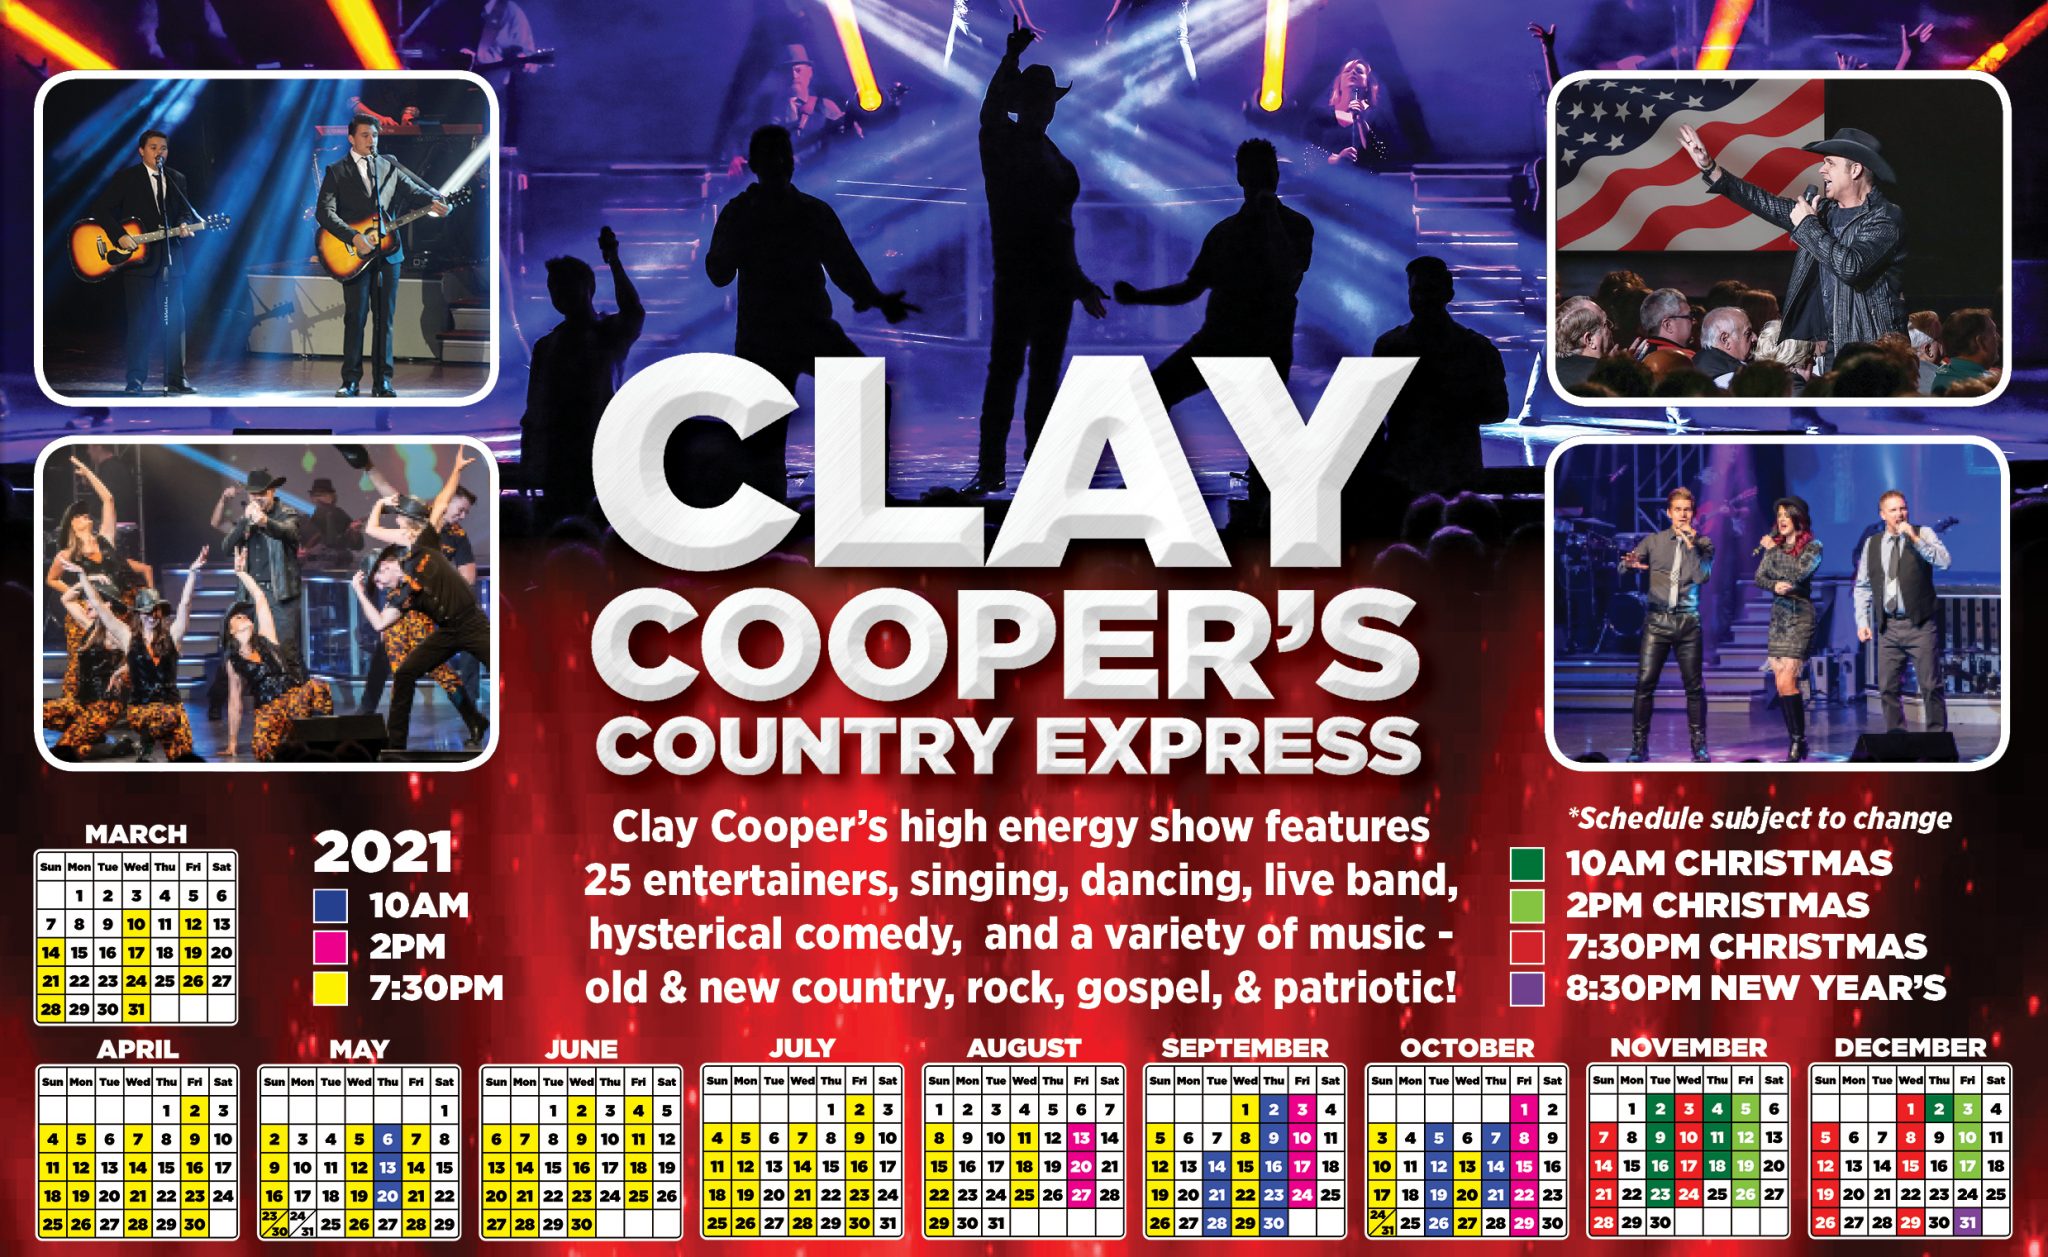 Clay Cooper's Country Express - Gathering Plus